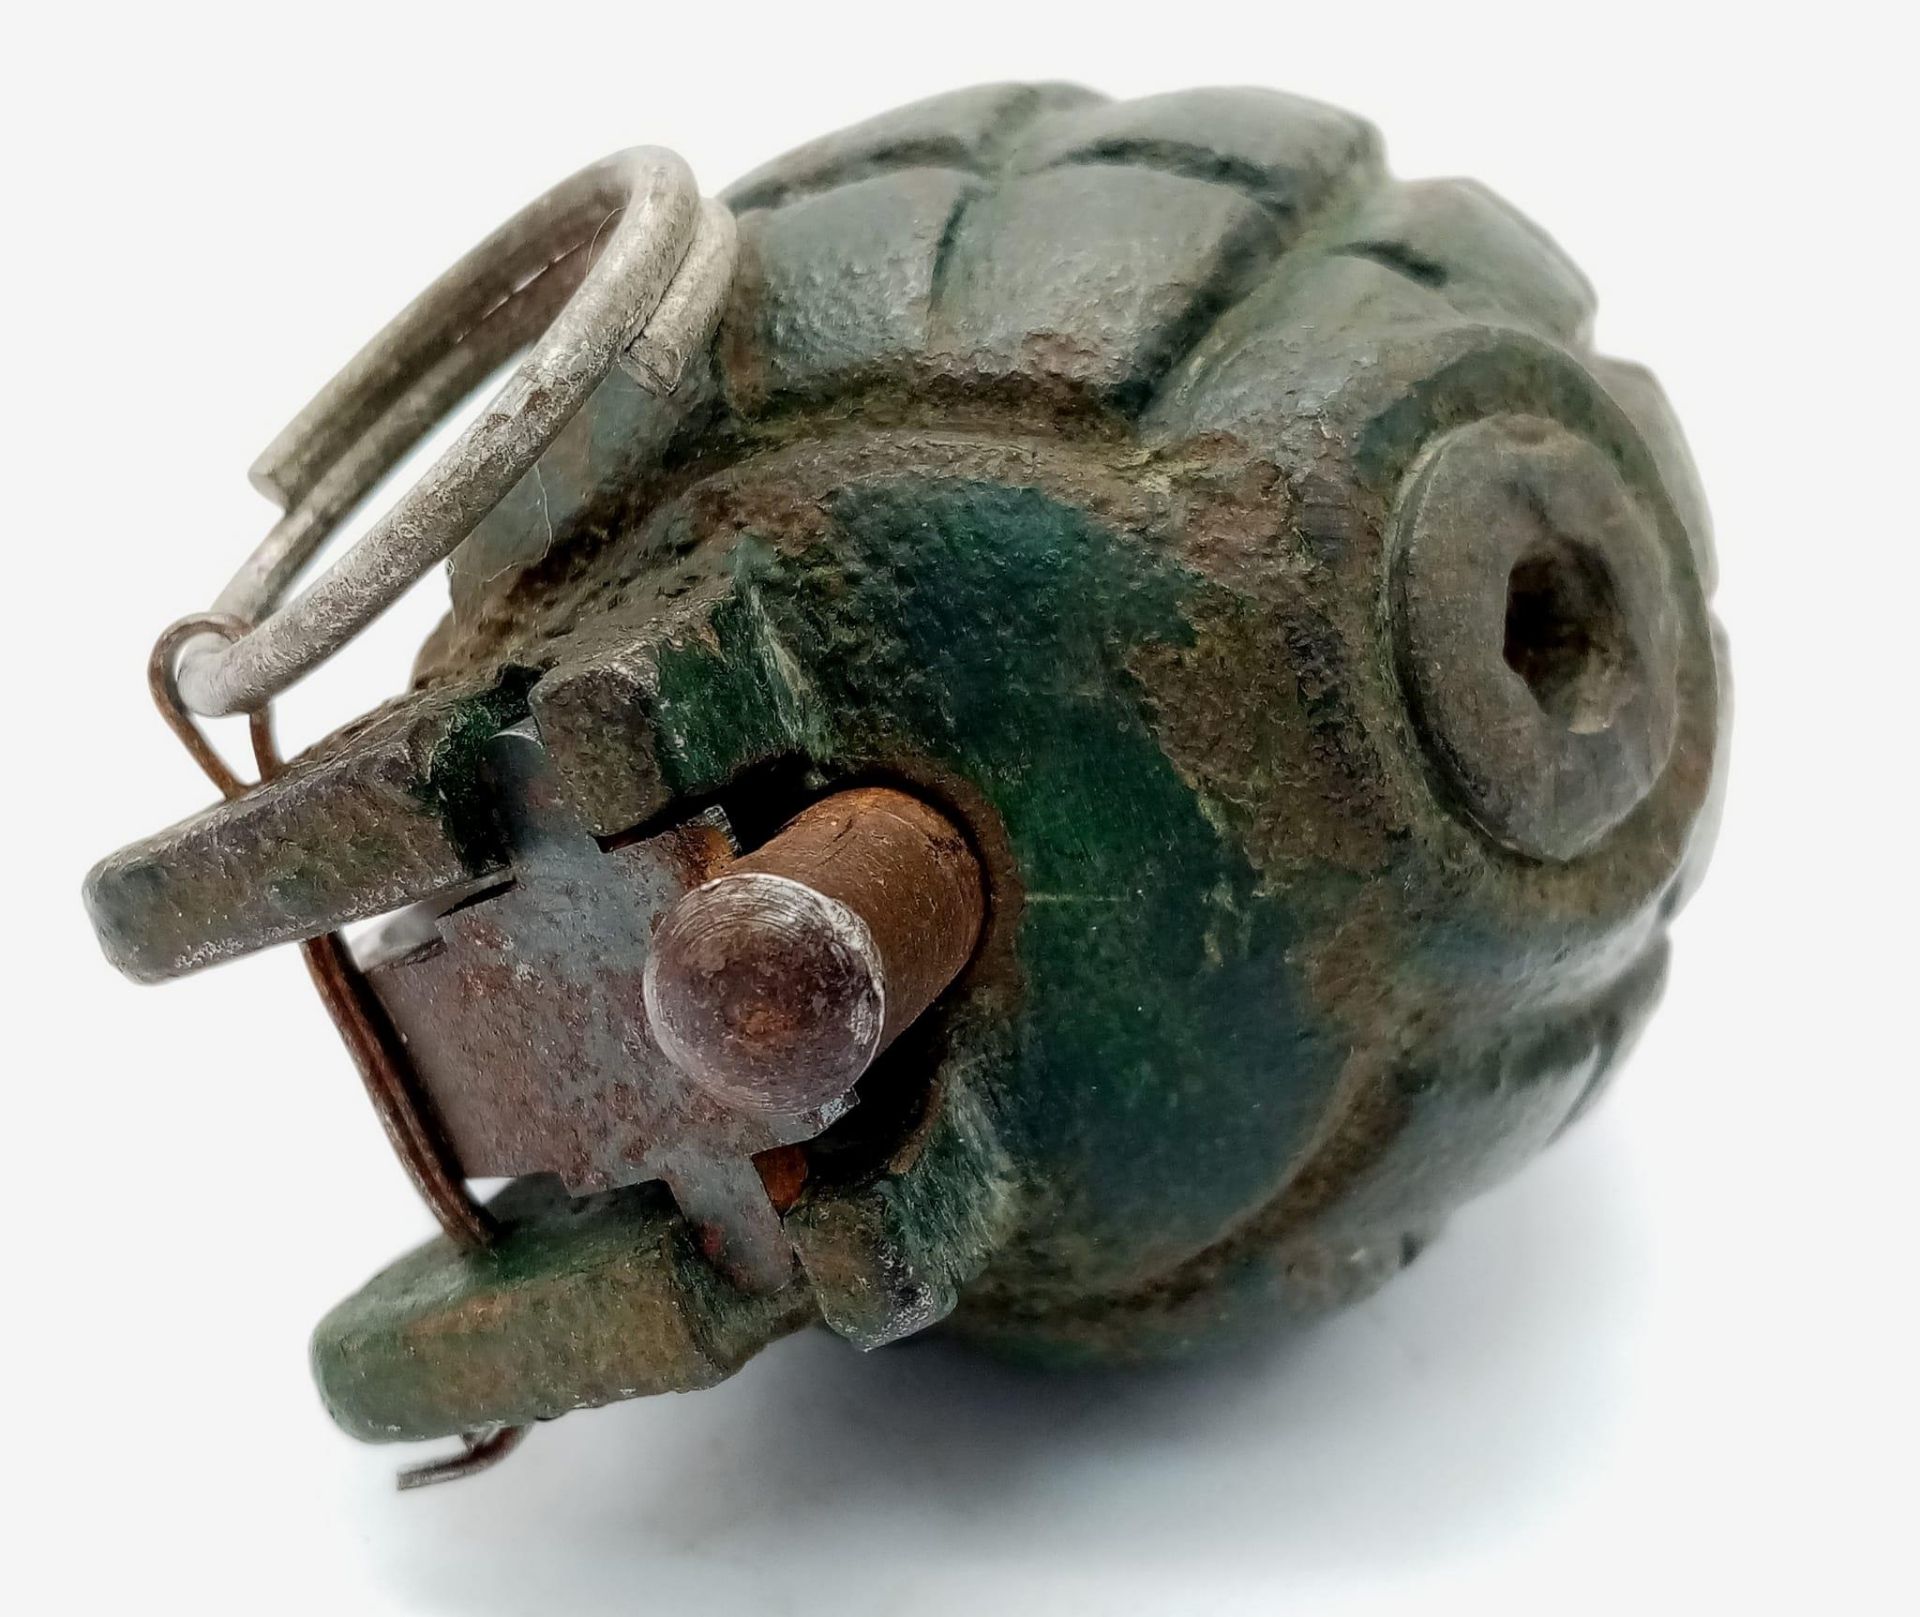 INERT Israeli Made No 36 Mills Grenade. Circa late 1940s-Mid 1950’s. UK Mainland Sales Only. - Image 5 of 6